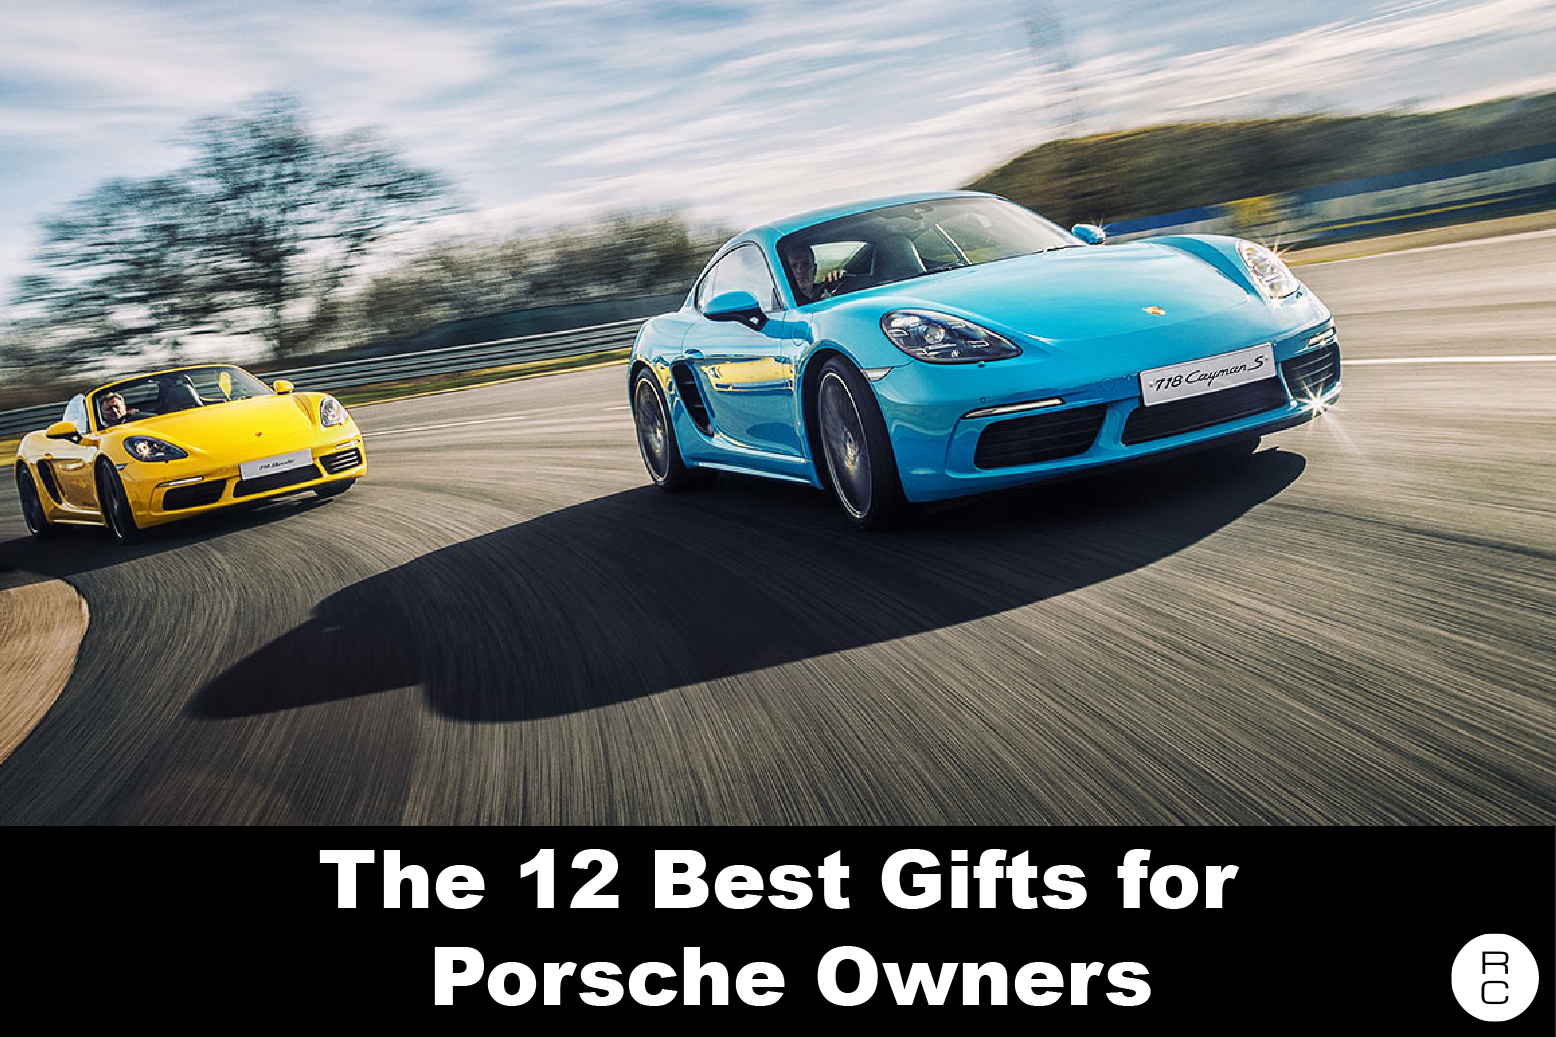 The 12 Best Gifts for Porsche Owners